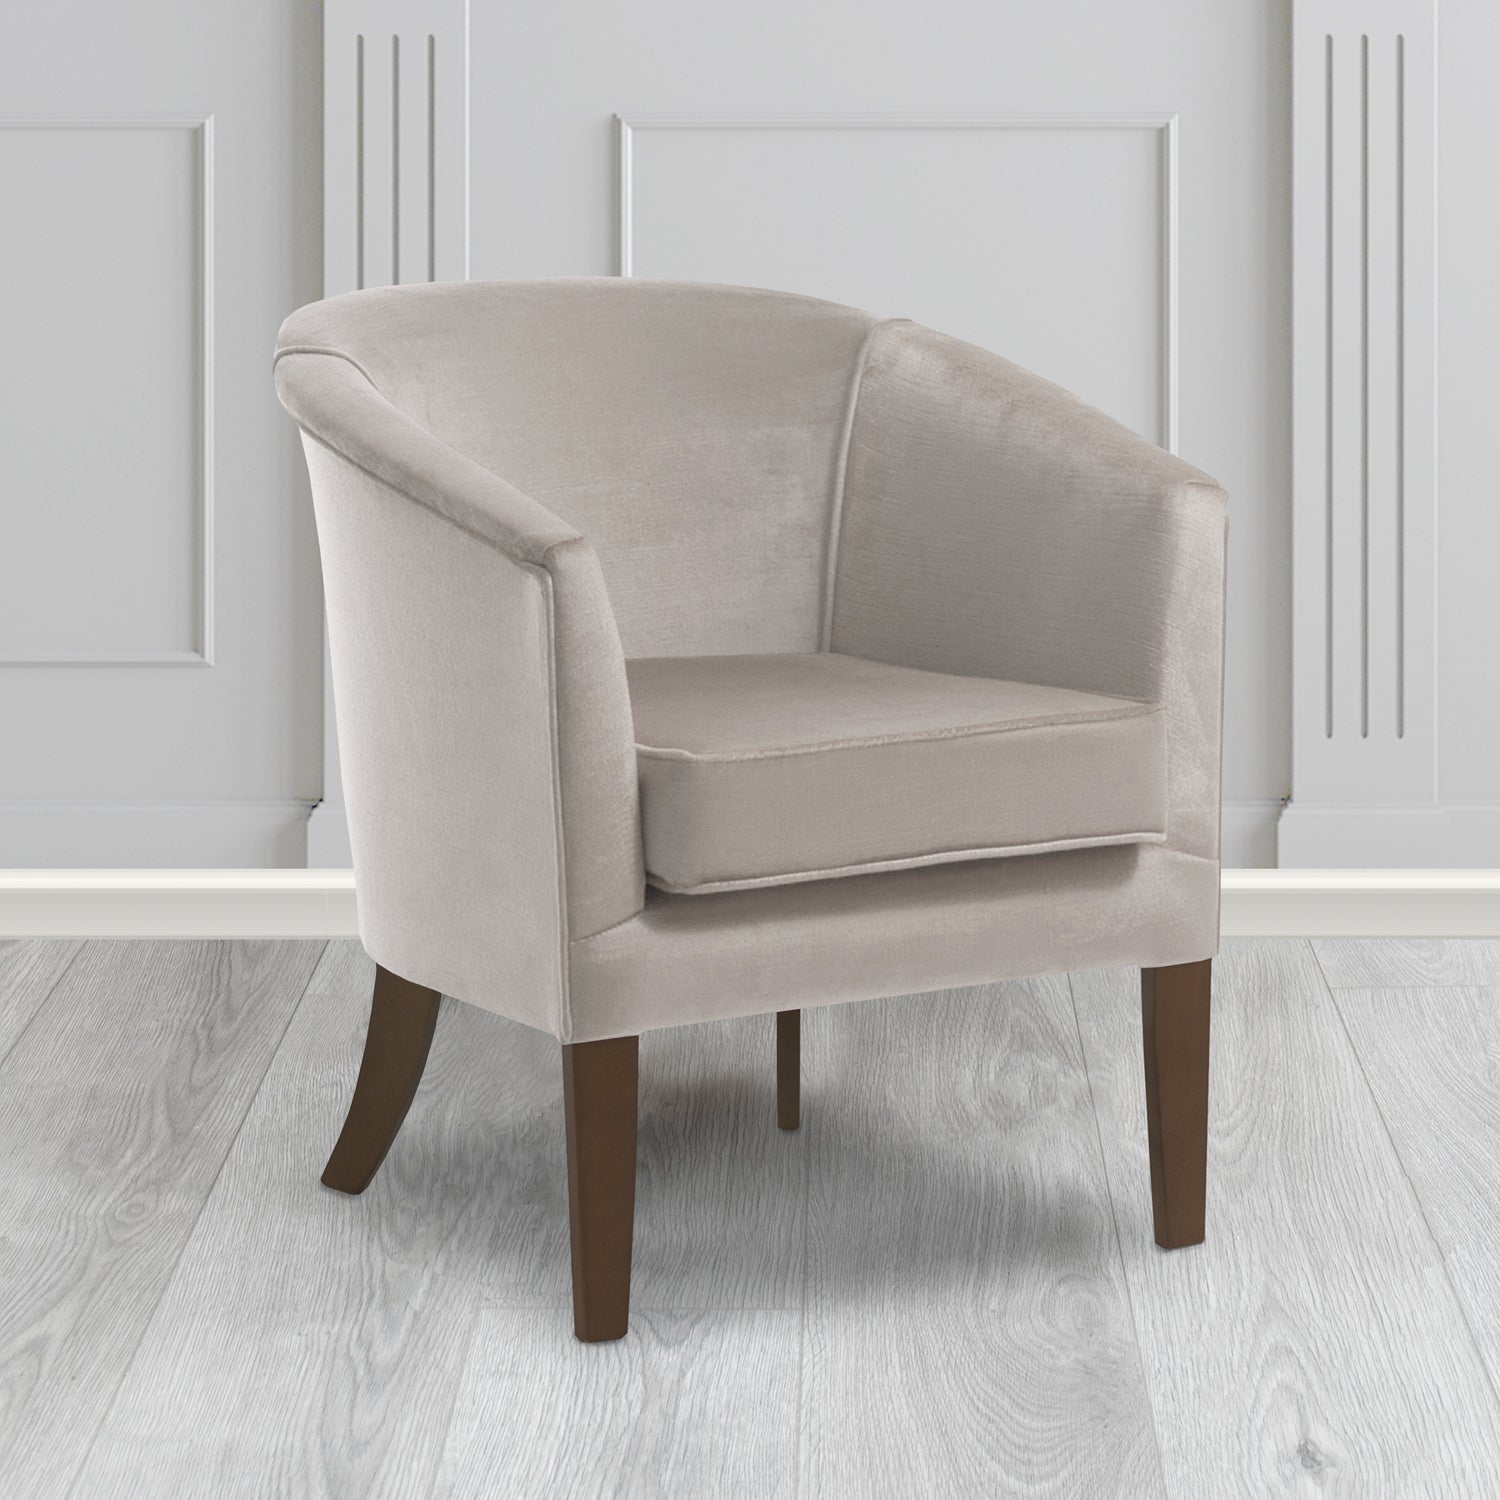 Jazz Tub Chair in Noble 952 Platinum Crib 5 Velvet Fabric - Water Resistant - The Tub Chair Shop